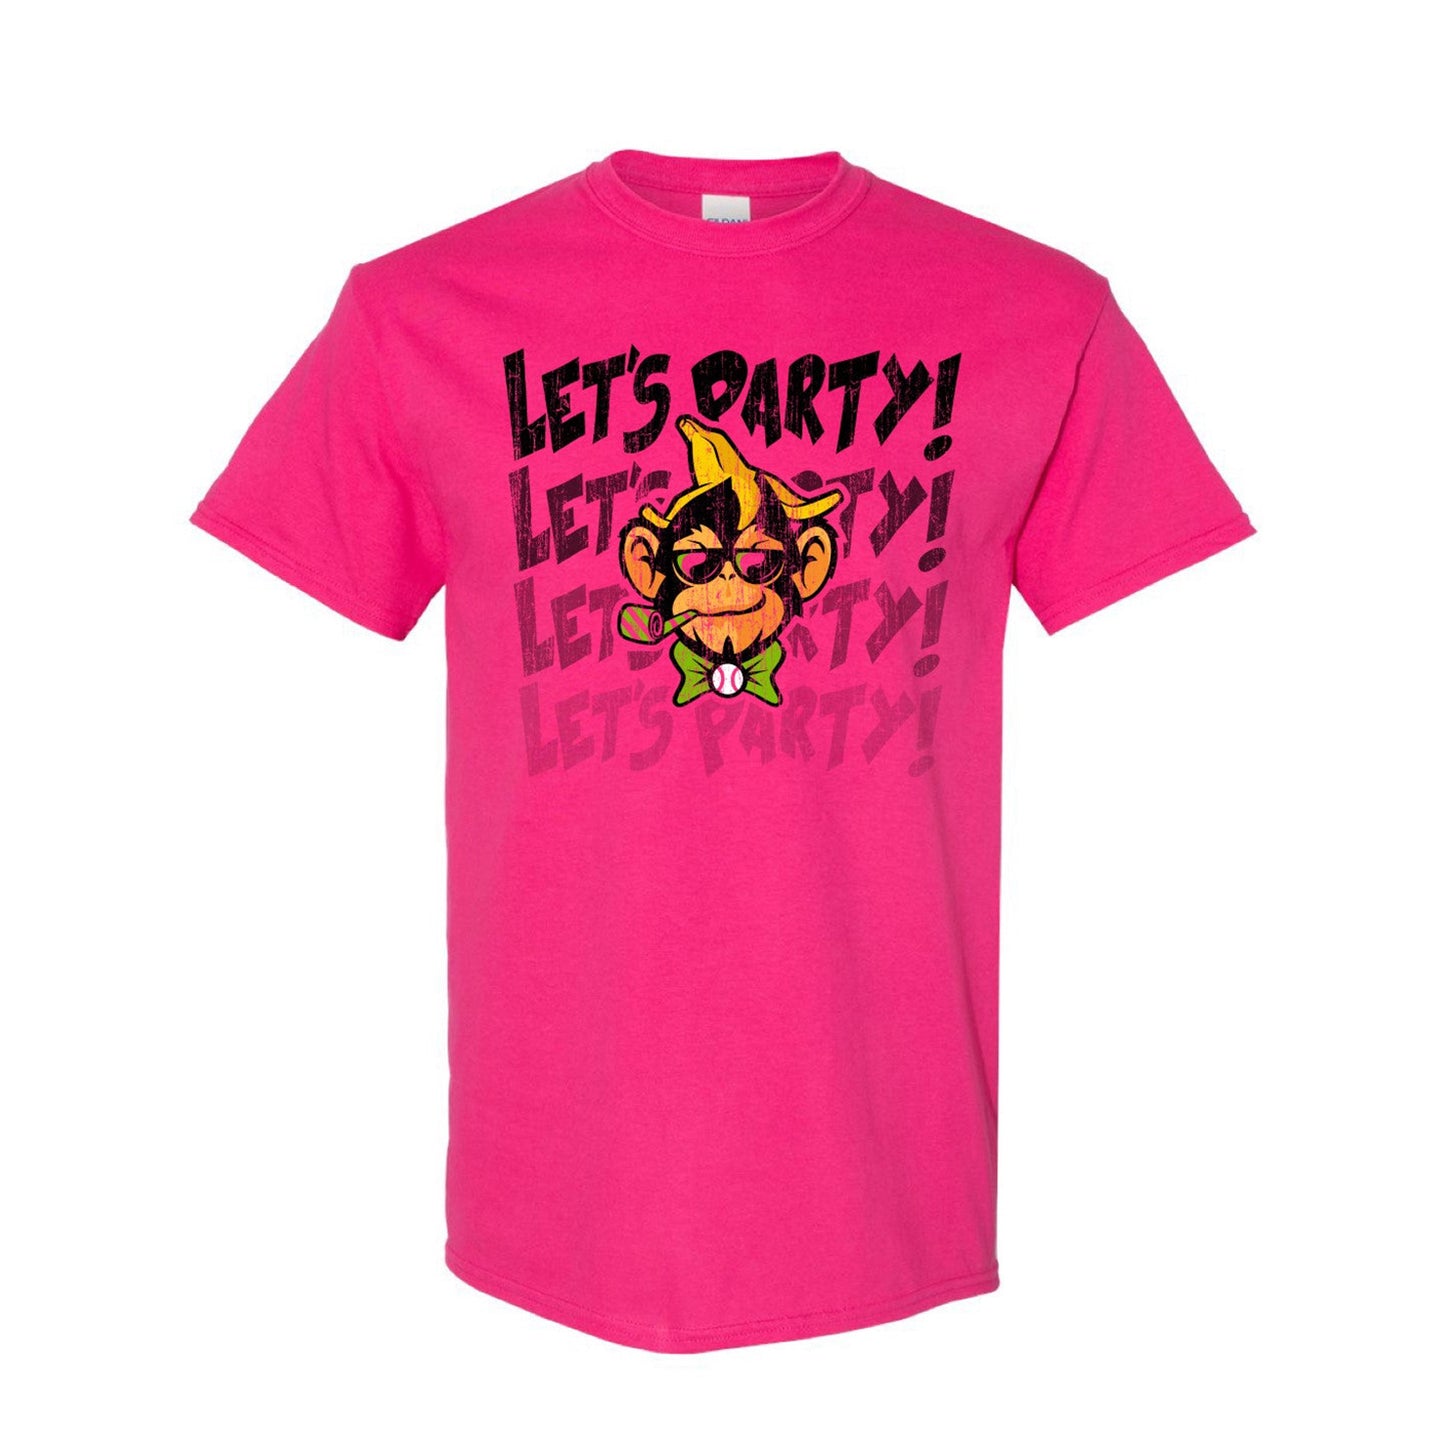 Party Animals Short Sleeve Let's Party Tee - Pink